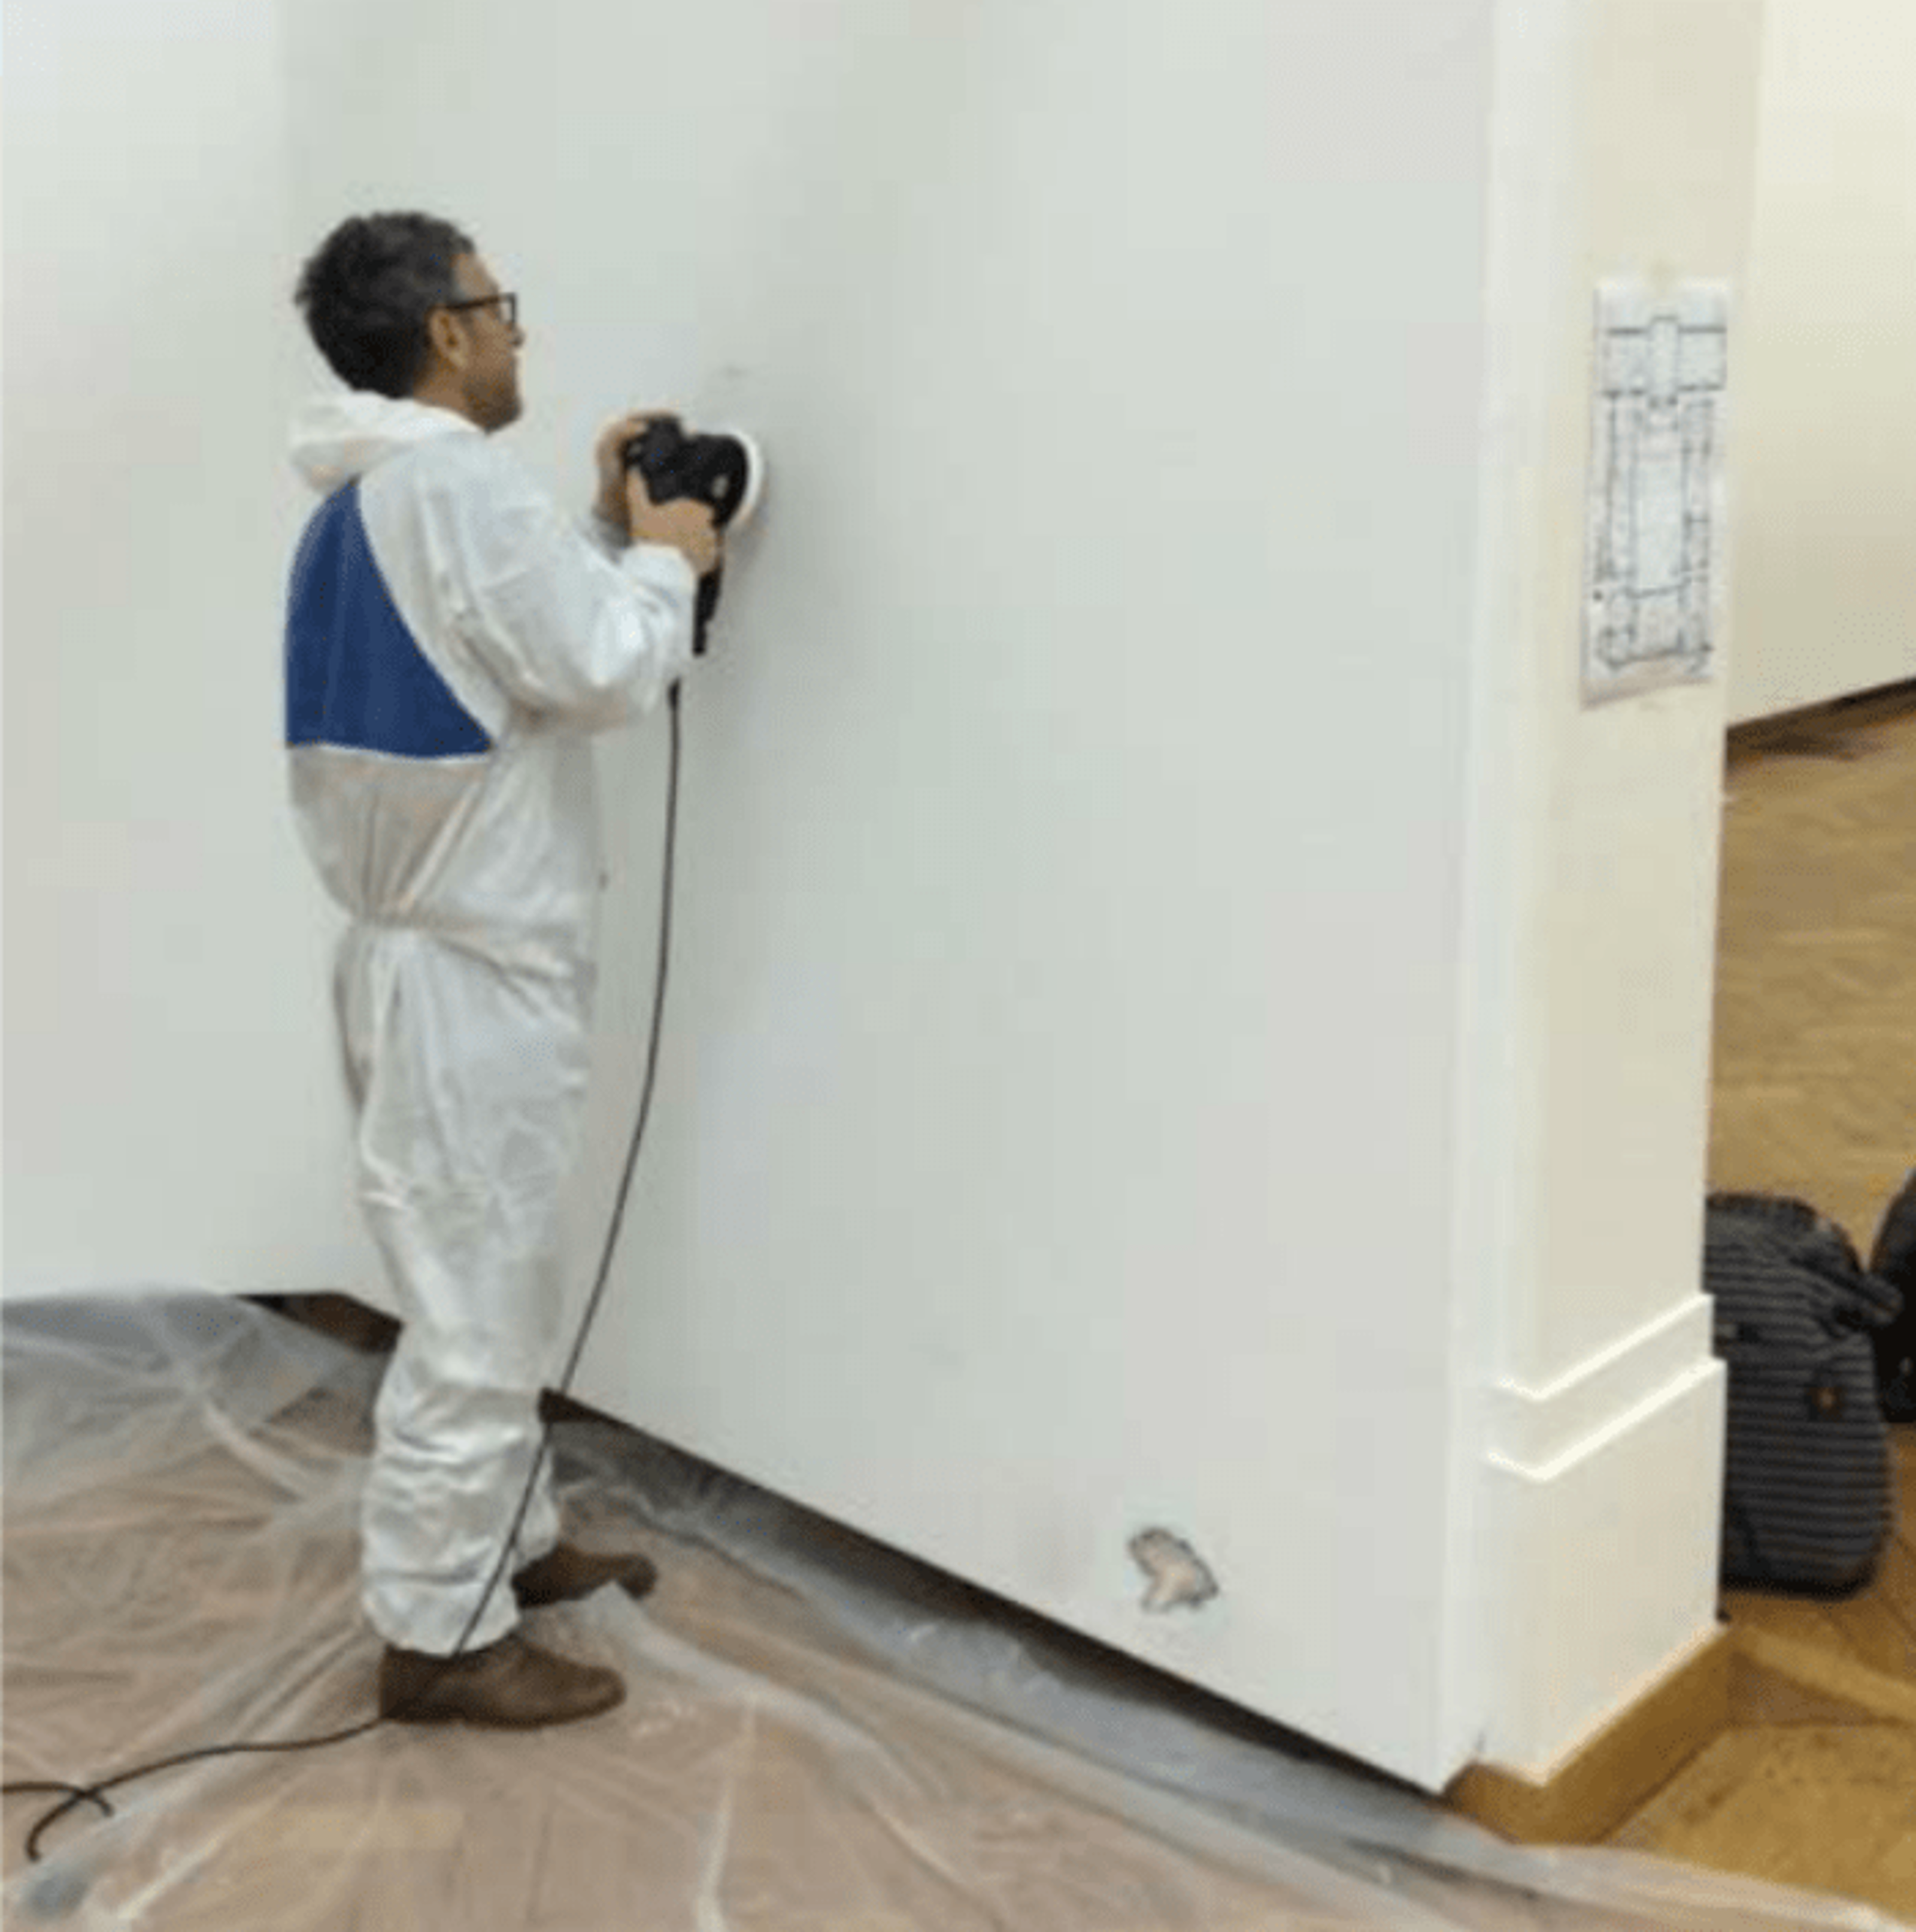 Pierre Huygue sanding a wall at the Palais des Beaux Arts, Brussels with an electric sander, dressed in all white